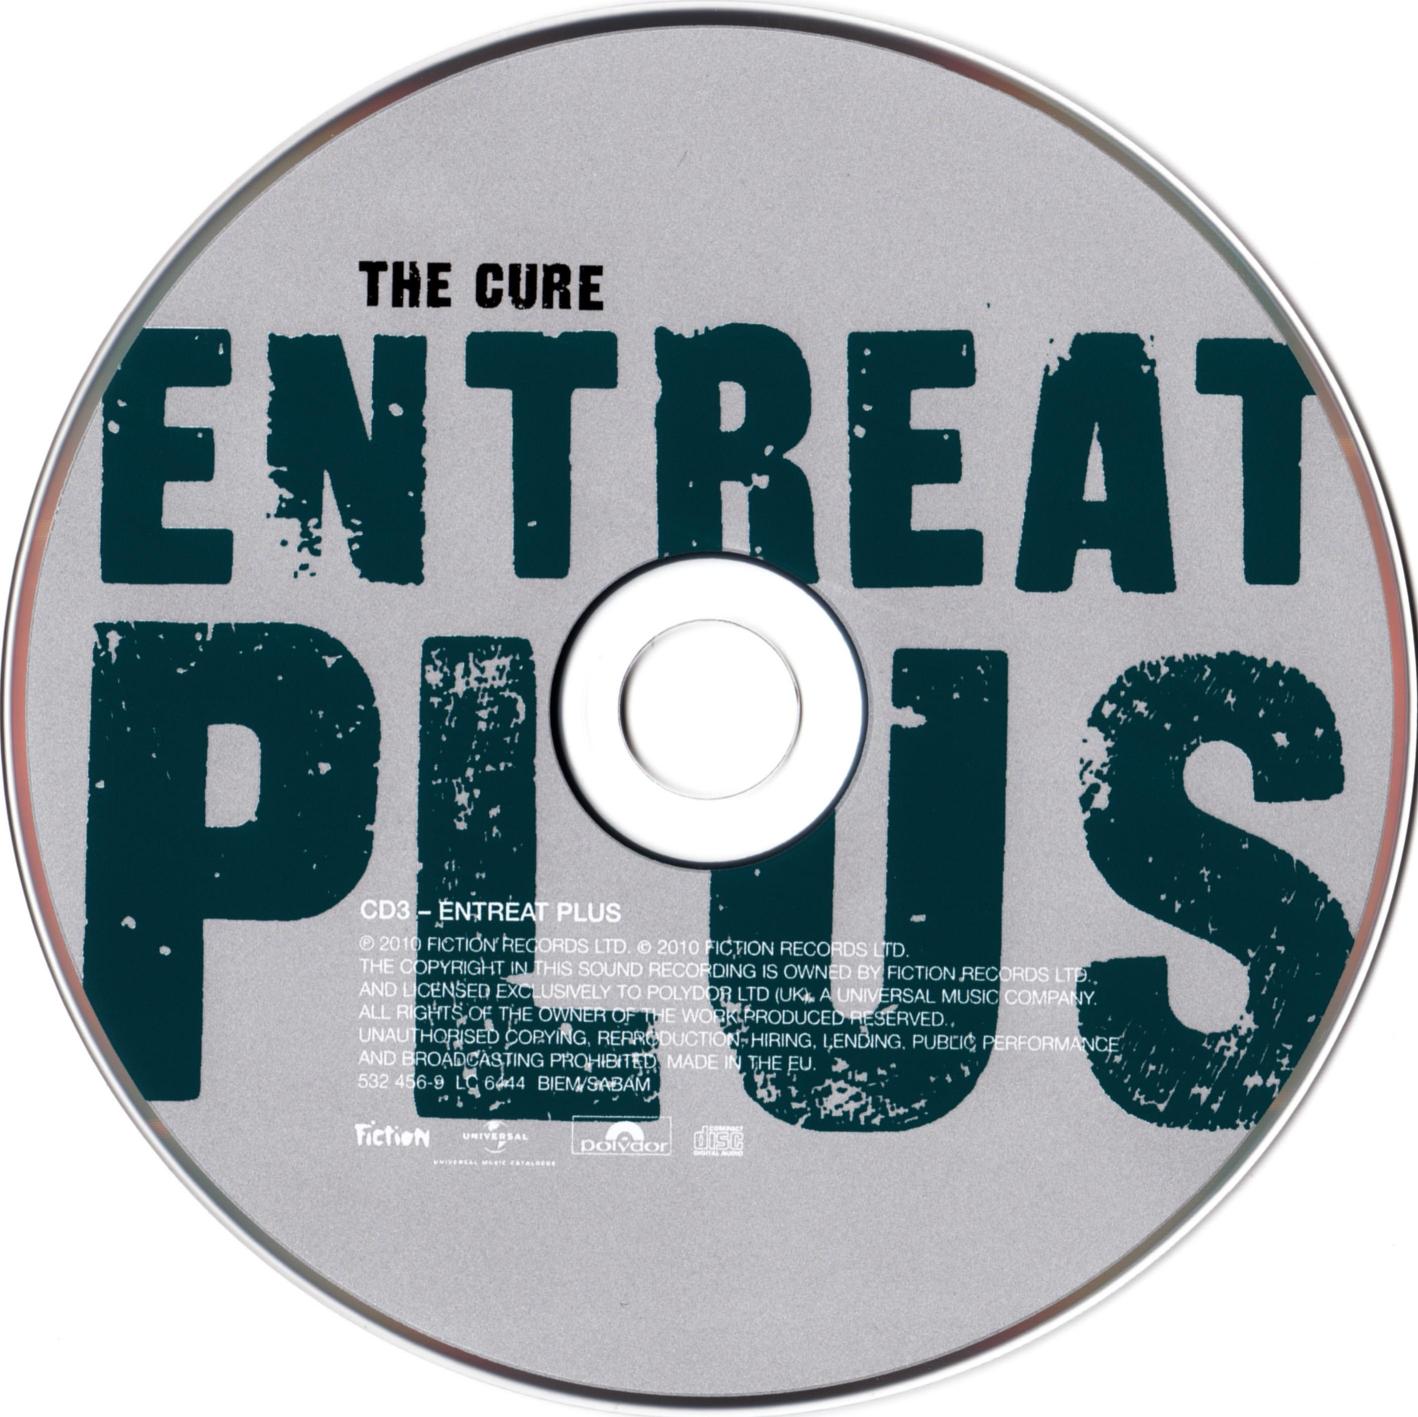 the cure disintegration remastered deluxe edition 2010 flac zip